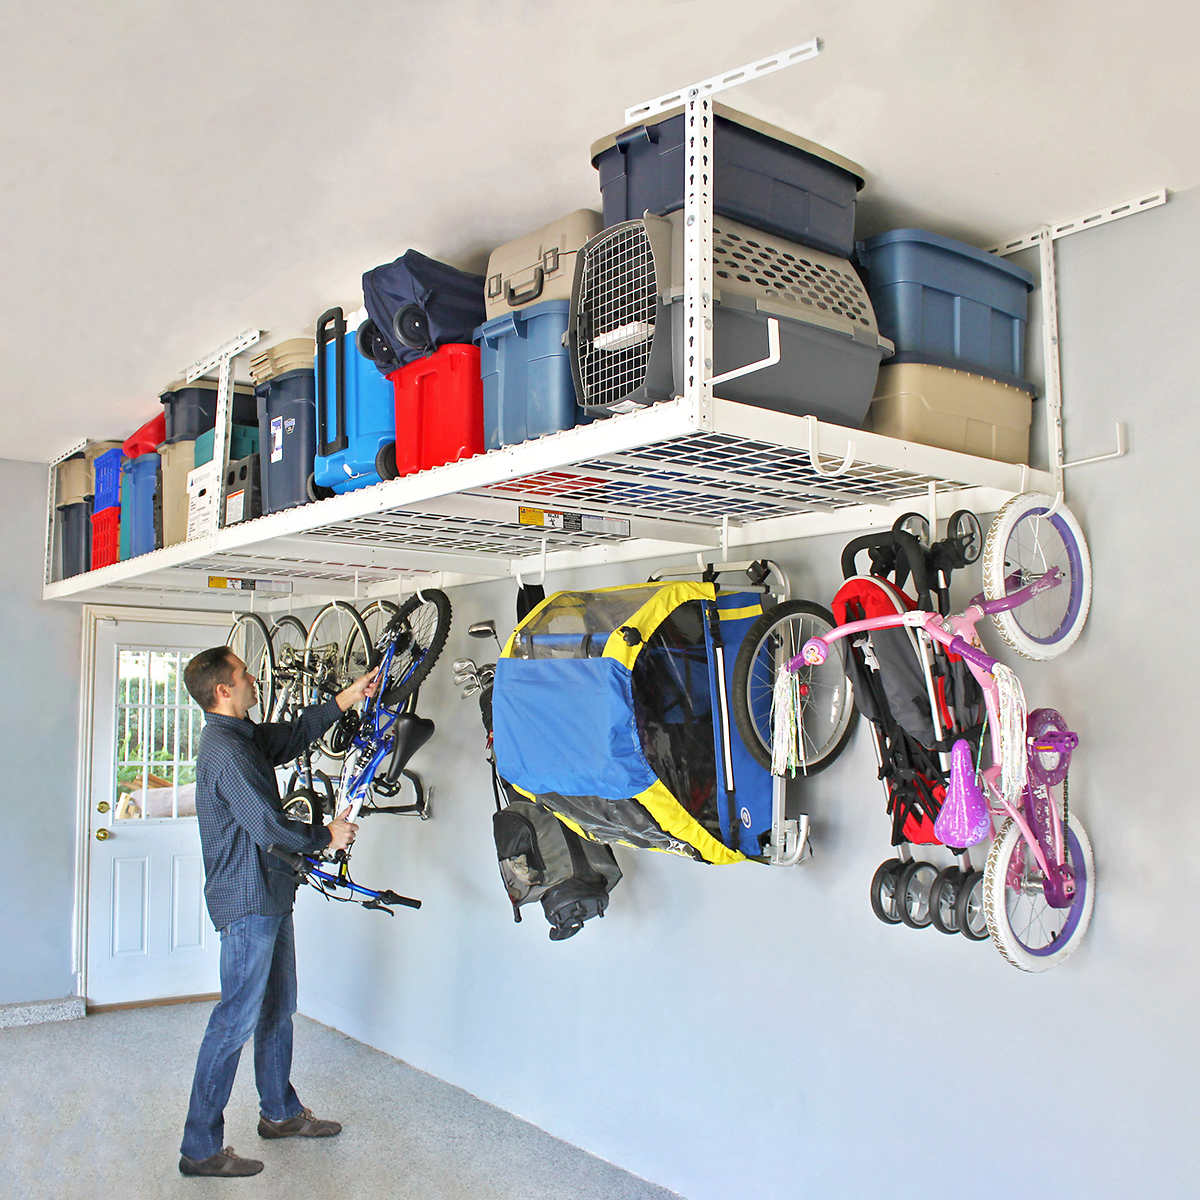 Costco : SafeRacks Overhead Garage Storage Combo Kit, Two 4 ft. x 8 ft. Racks, 18-piece Deluxe Hook Accessory Pack  - $239.99